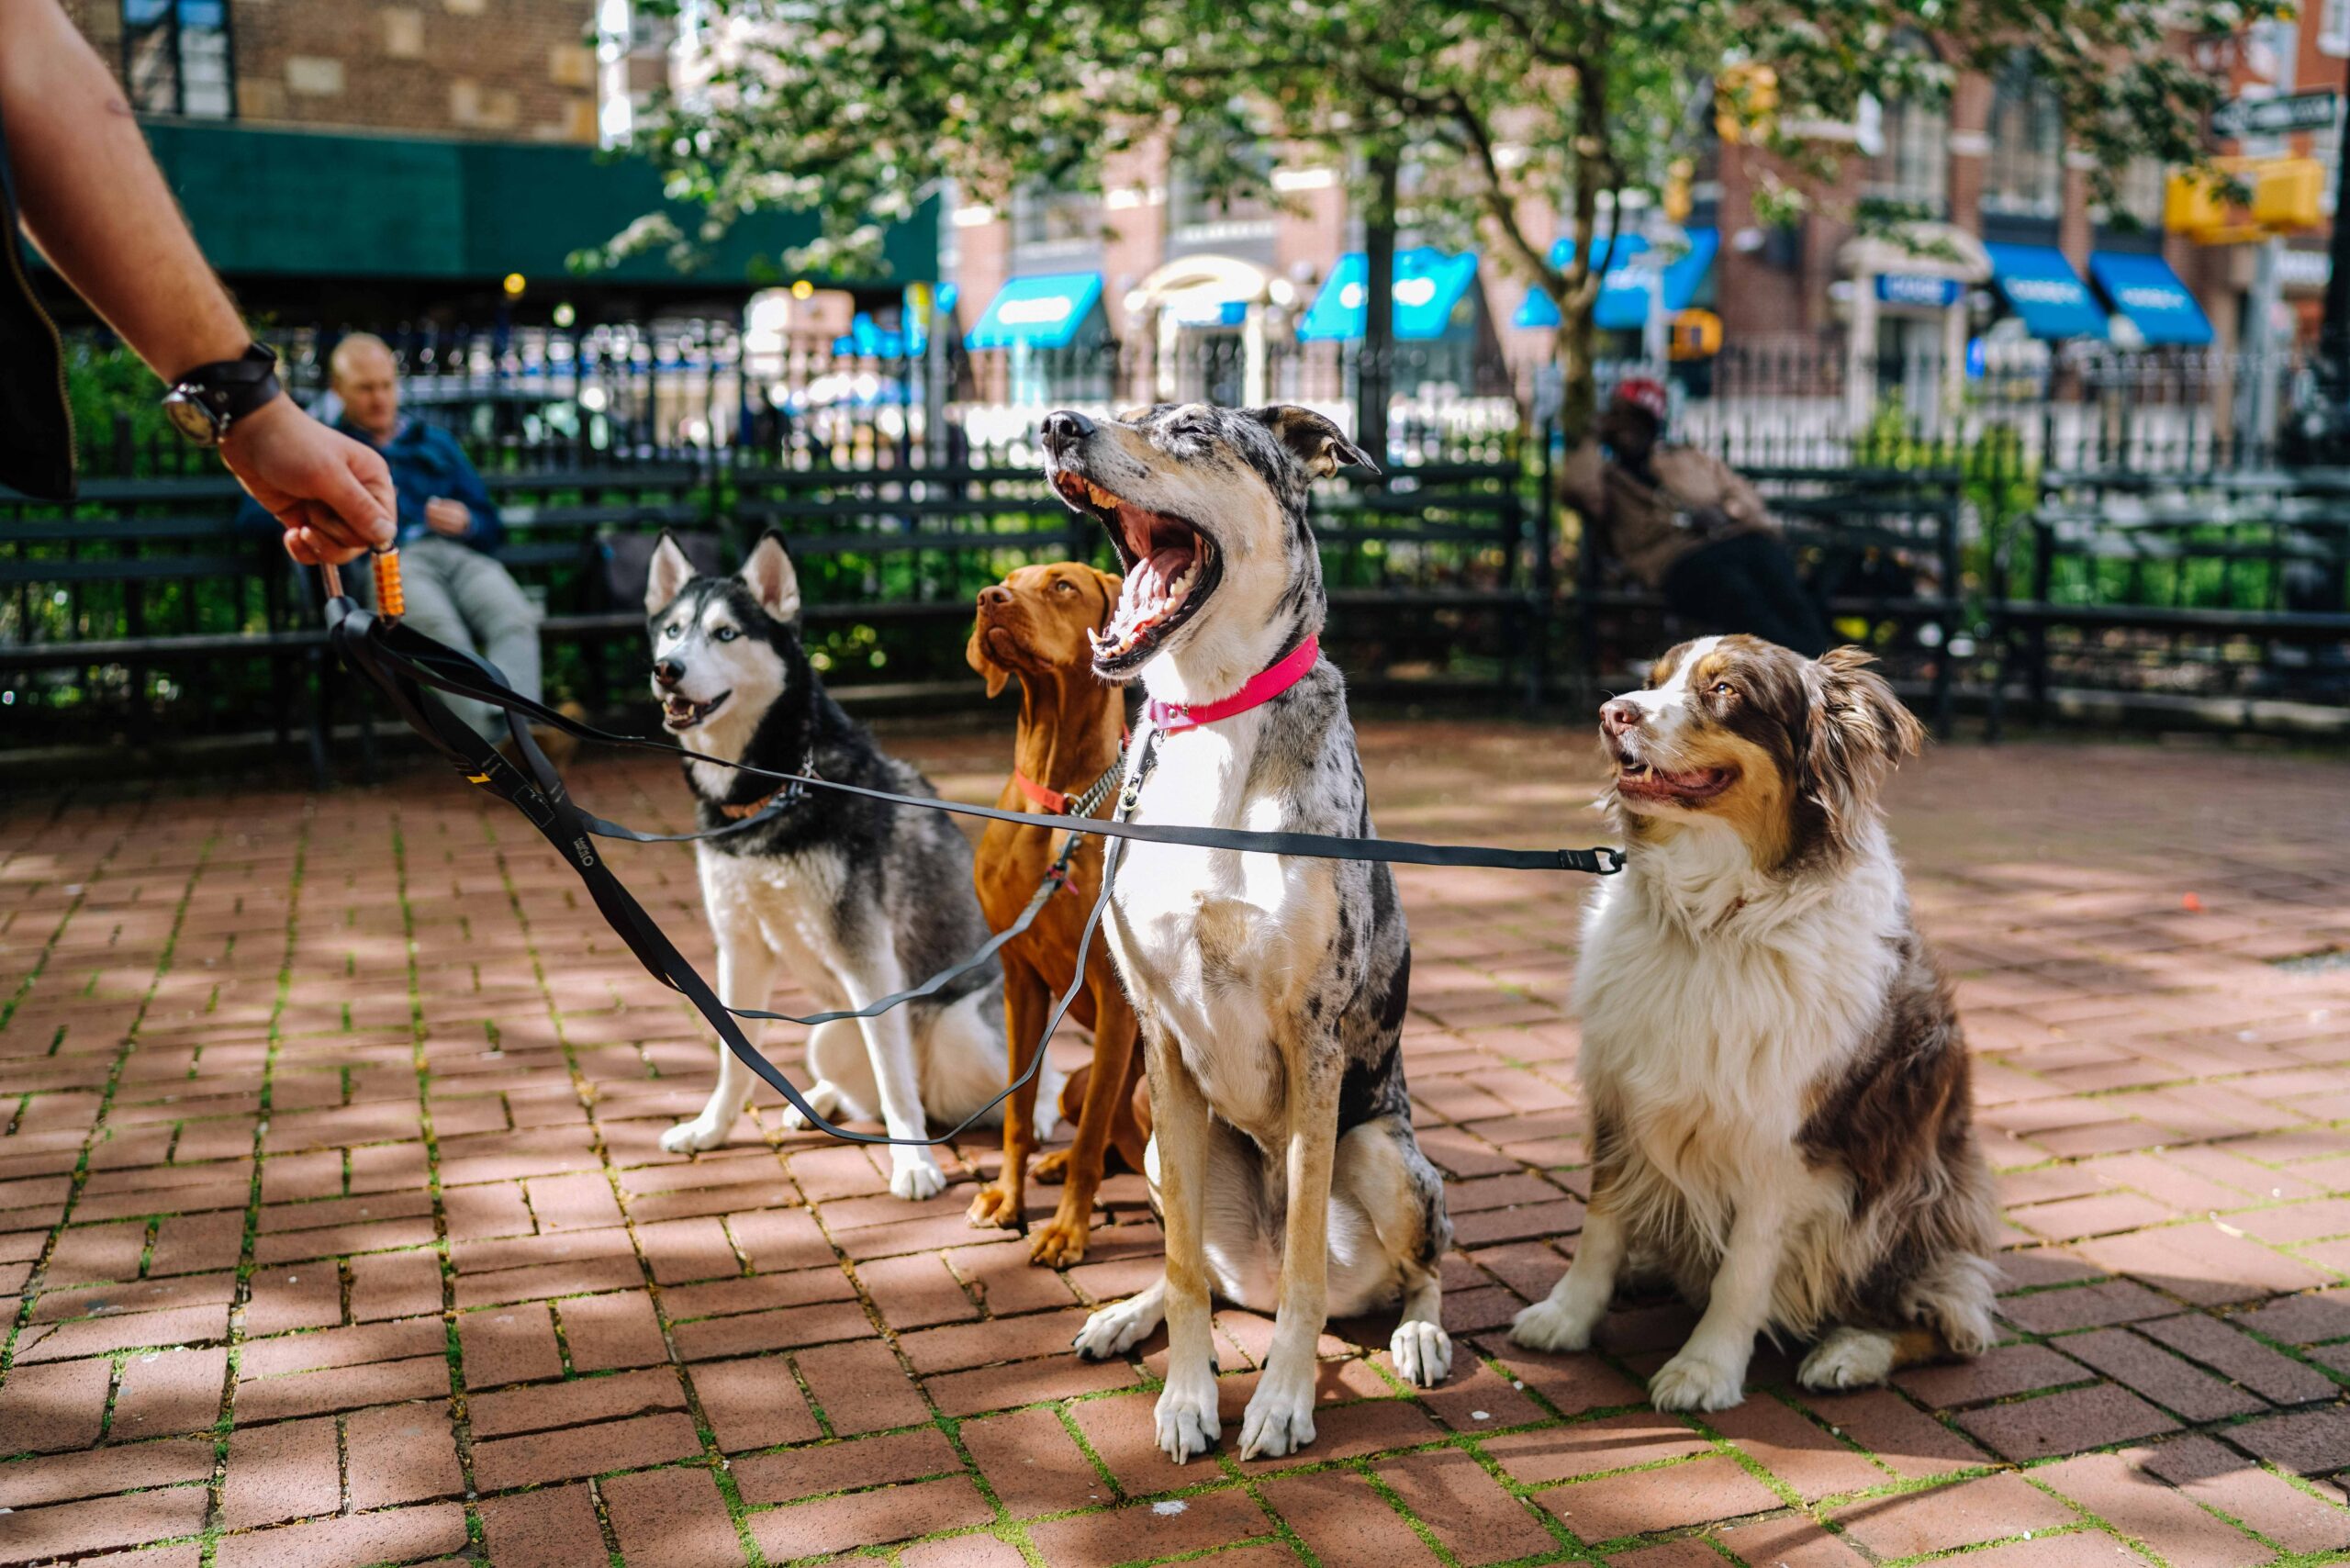 6 Things to Look for When Hiring a Dog Walker